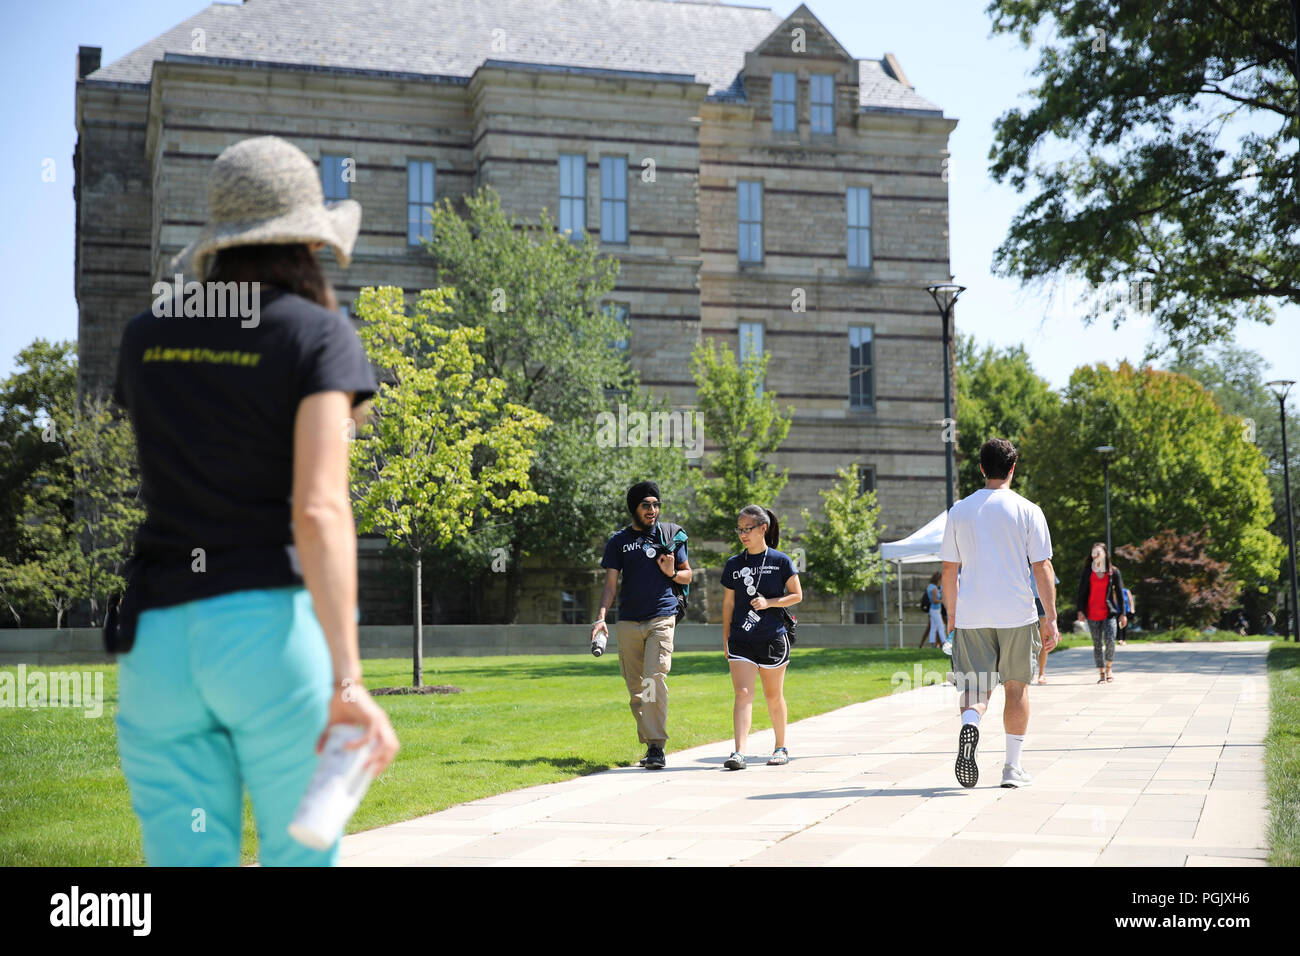 Ohio, USA. 23rd Aug, 2018. Students walk at Case Western Reserve University (CWRU) in Cleveland, Ohio, the United States, Aug. 23, 2018. It might not be as famous as the Ivy League schools, CWRU, located in Cleveland, the U.S. midwestern state of Ohio, is among the top American universities that Chinese students choose to study in. TO GO WITH Feature: Midwest U.S. university aspires to attract more Chinese students Credit: Wang Ying/Xinhua/Alamy Live News Stock Photo